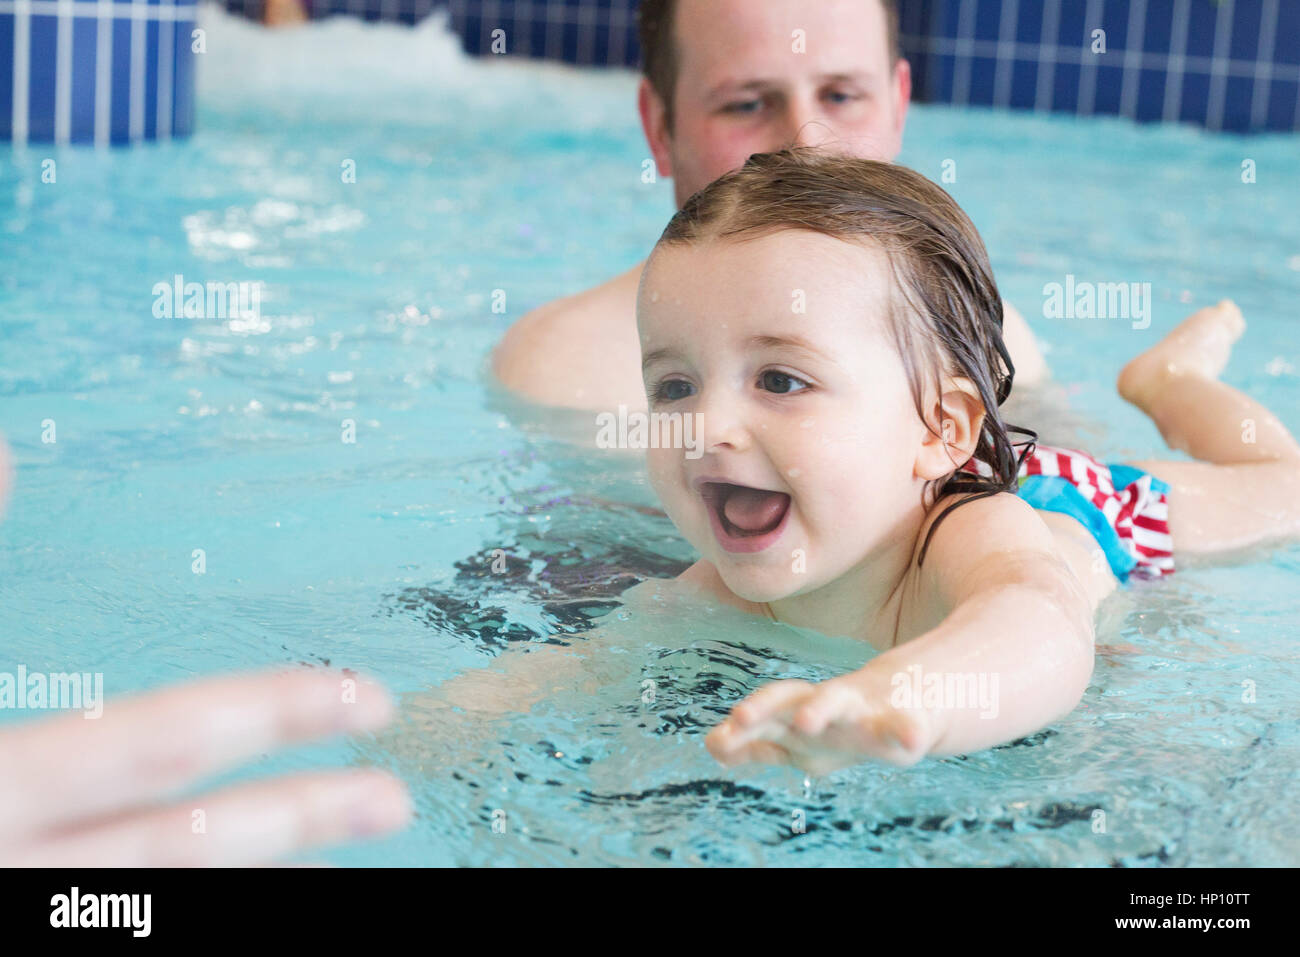 Little girl learning to swim with help of parent Stock Photo